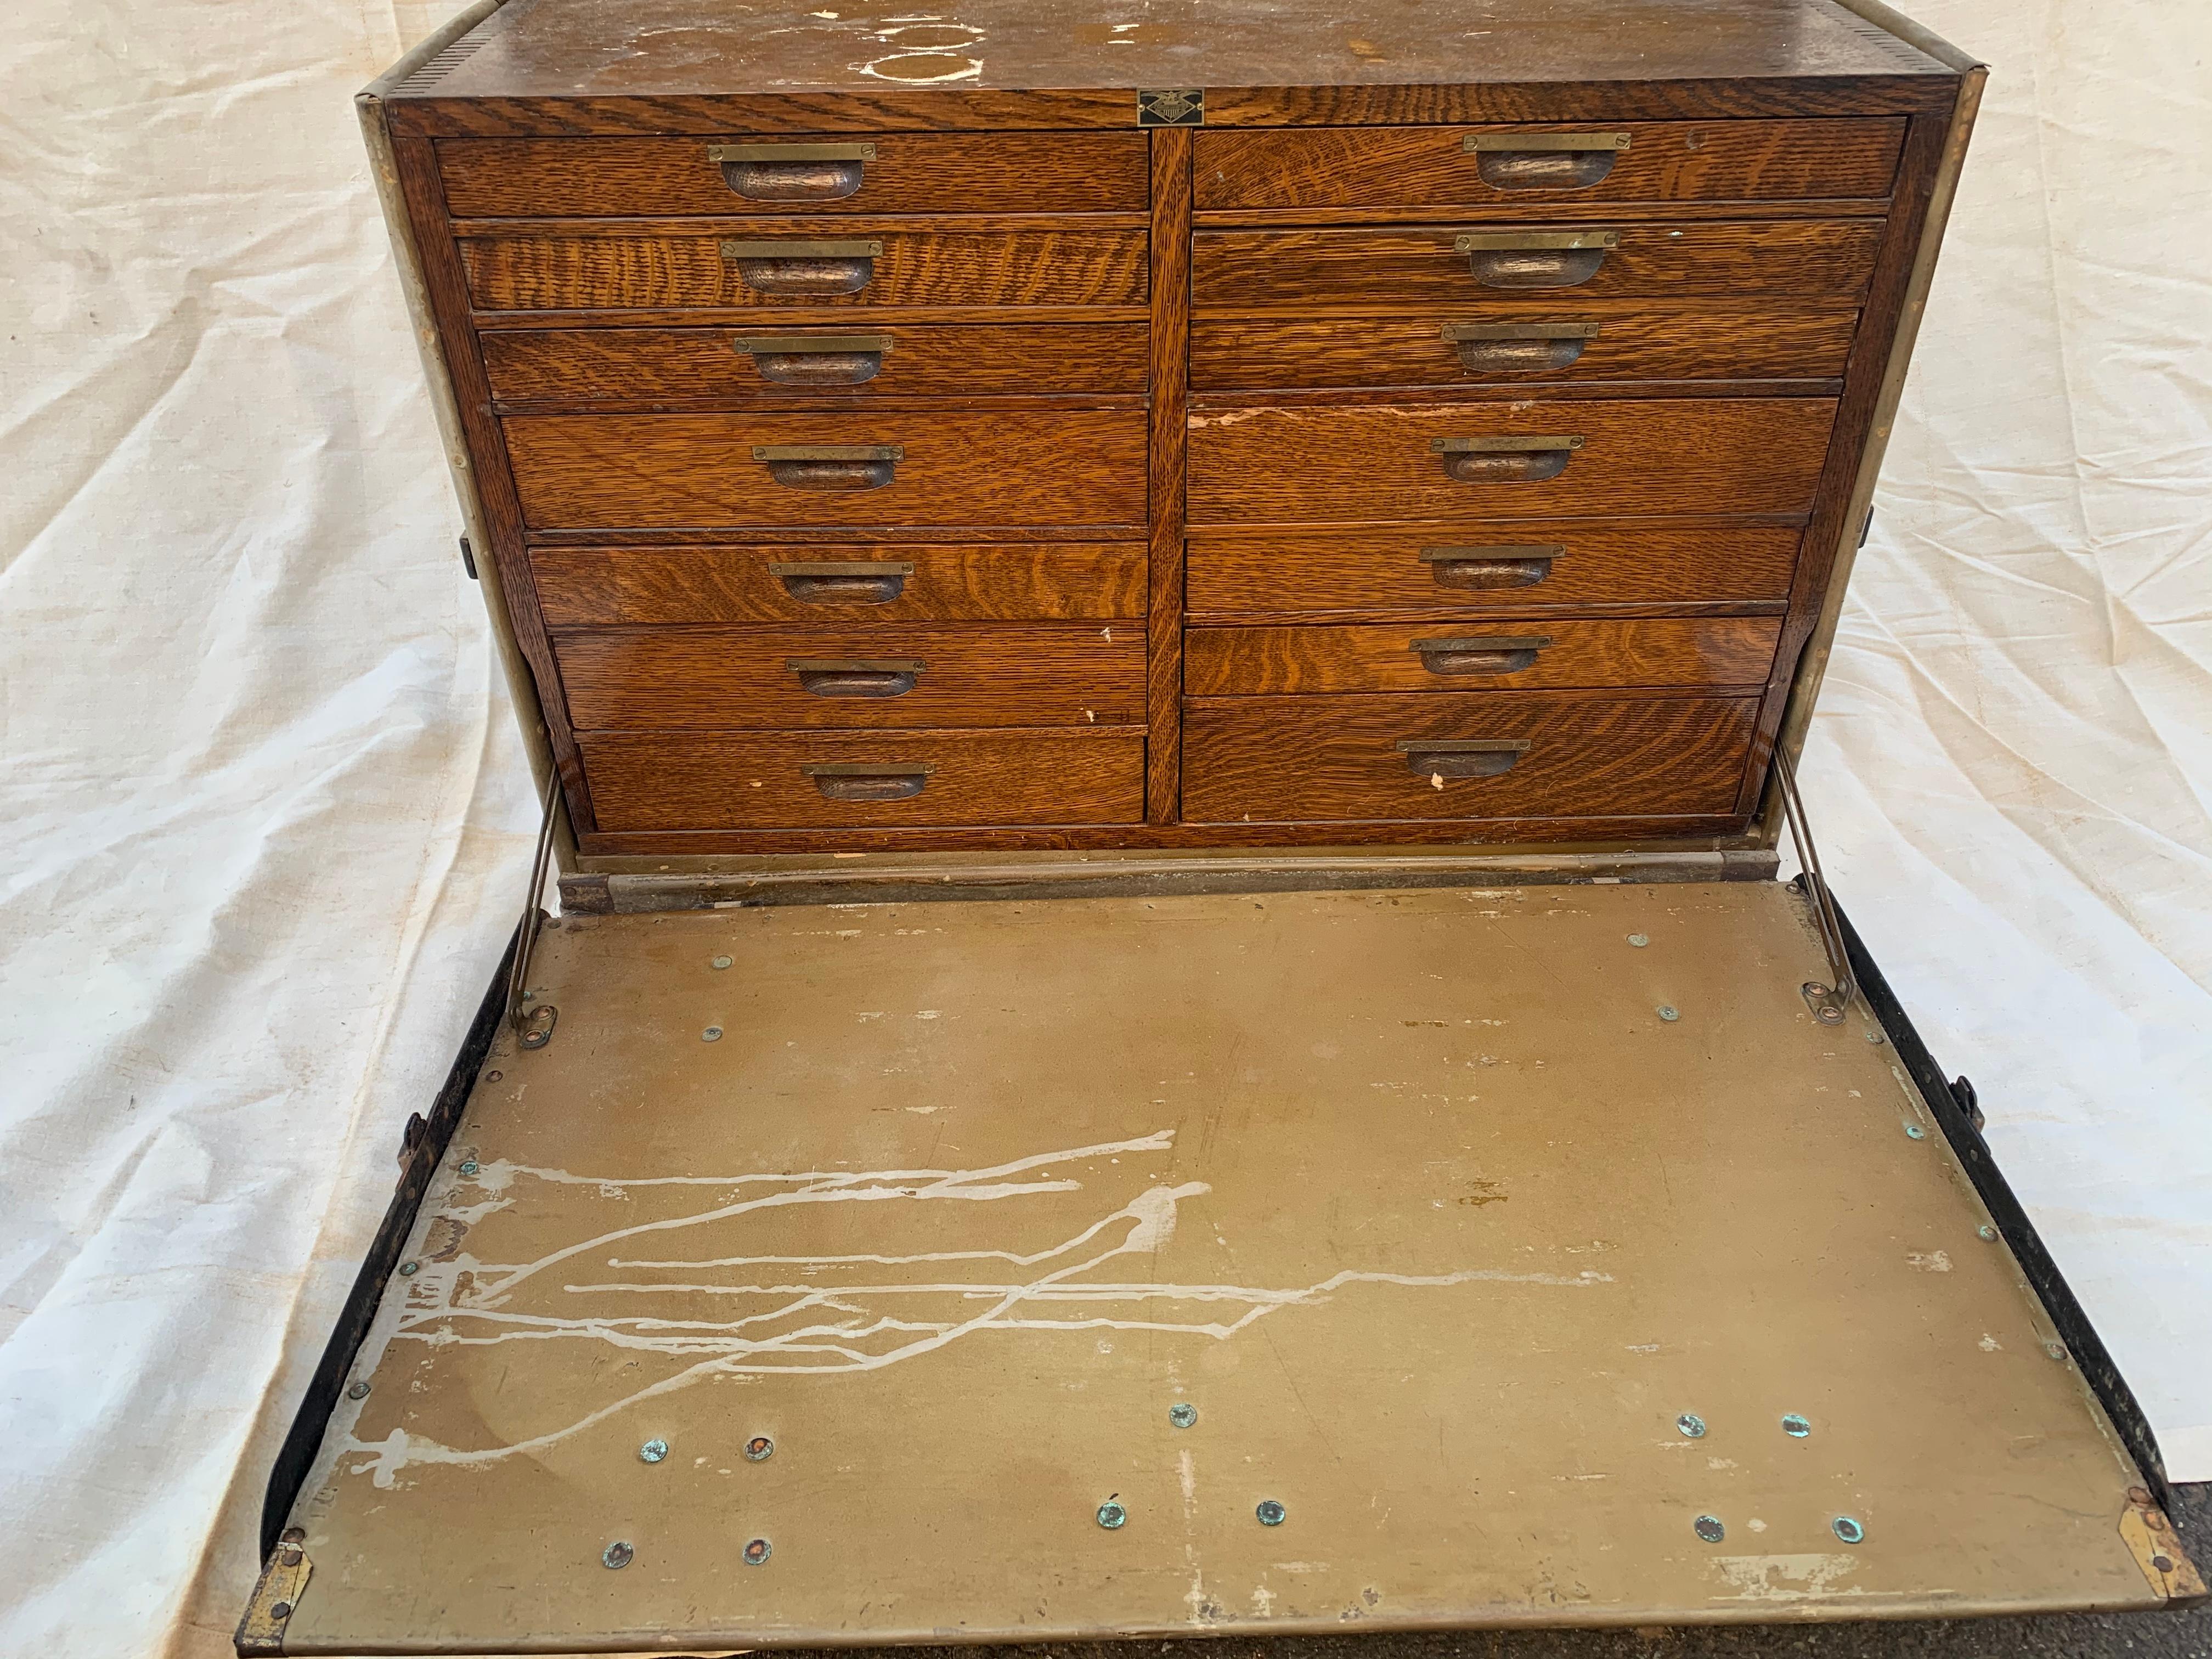 A rare Campaign style WWII US Army Medical field desk trunk made by the American Cabinet Company that says Dental Instrument desk operating on the top. It has a fabulous industrial masculine look when closed with original chunky hardware and